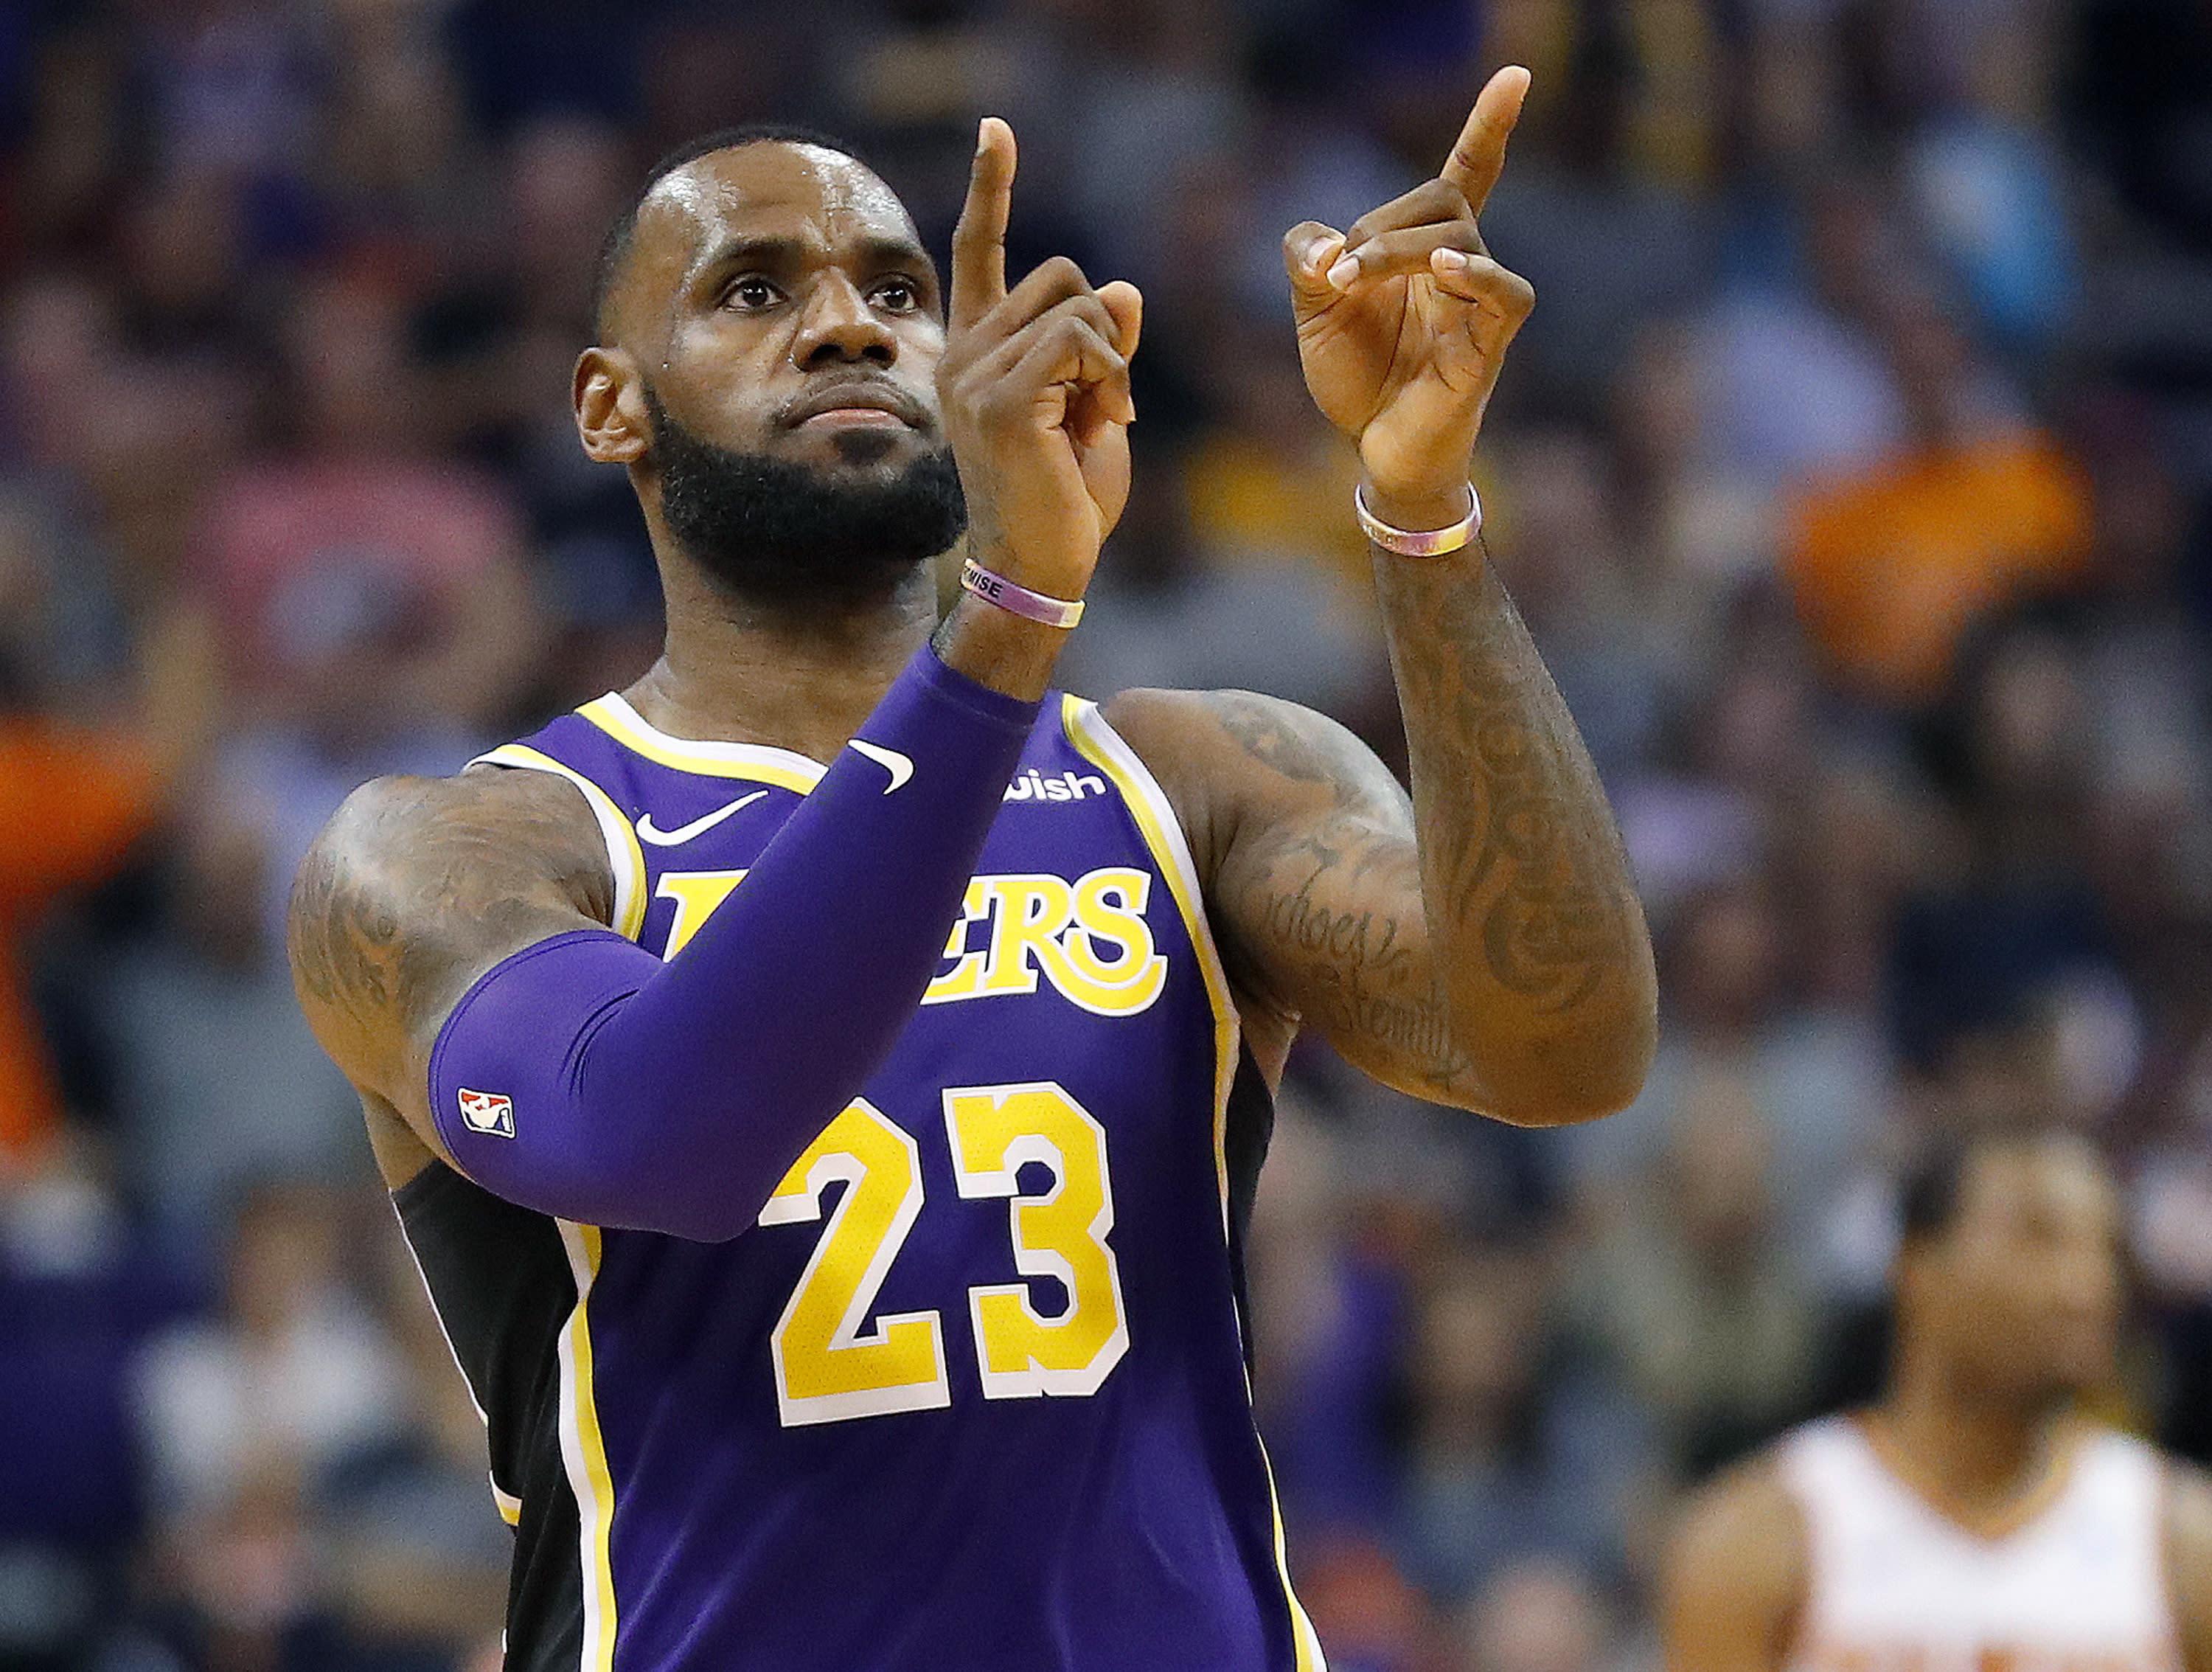  LeBron  James drains shots  from Lakers logo  in warmups